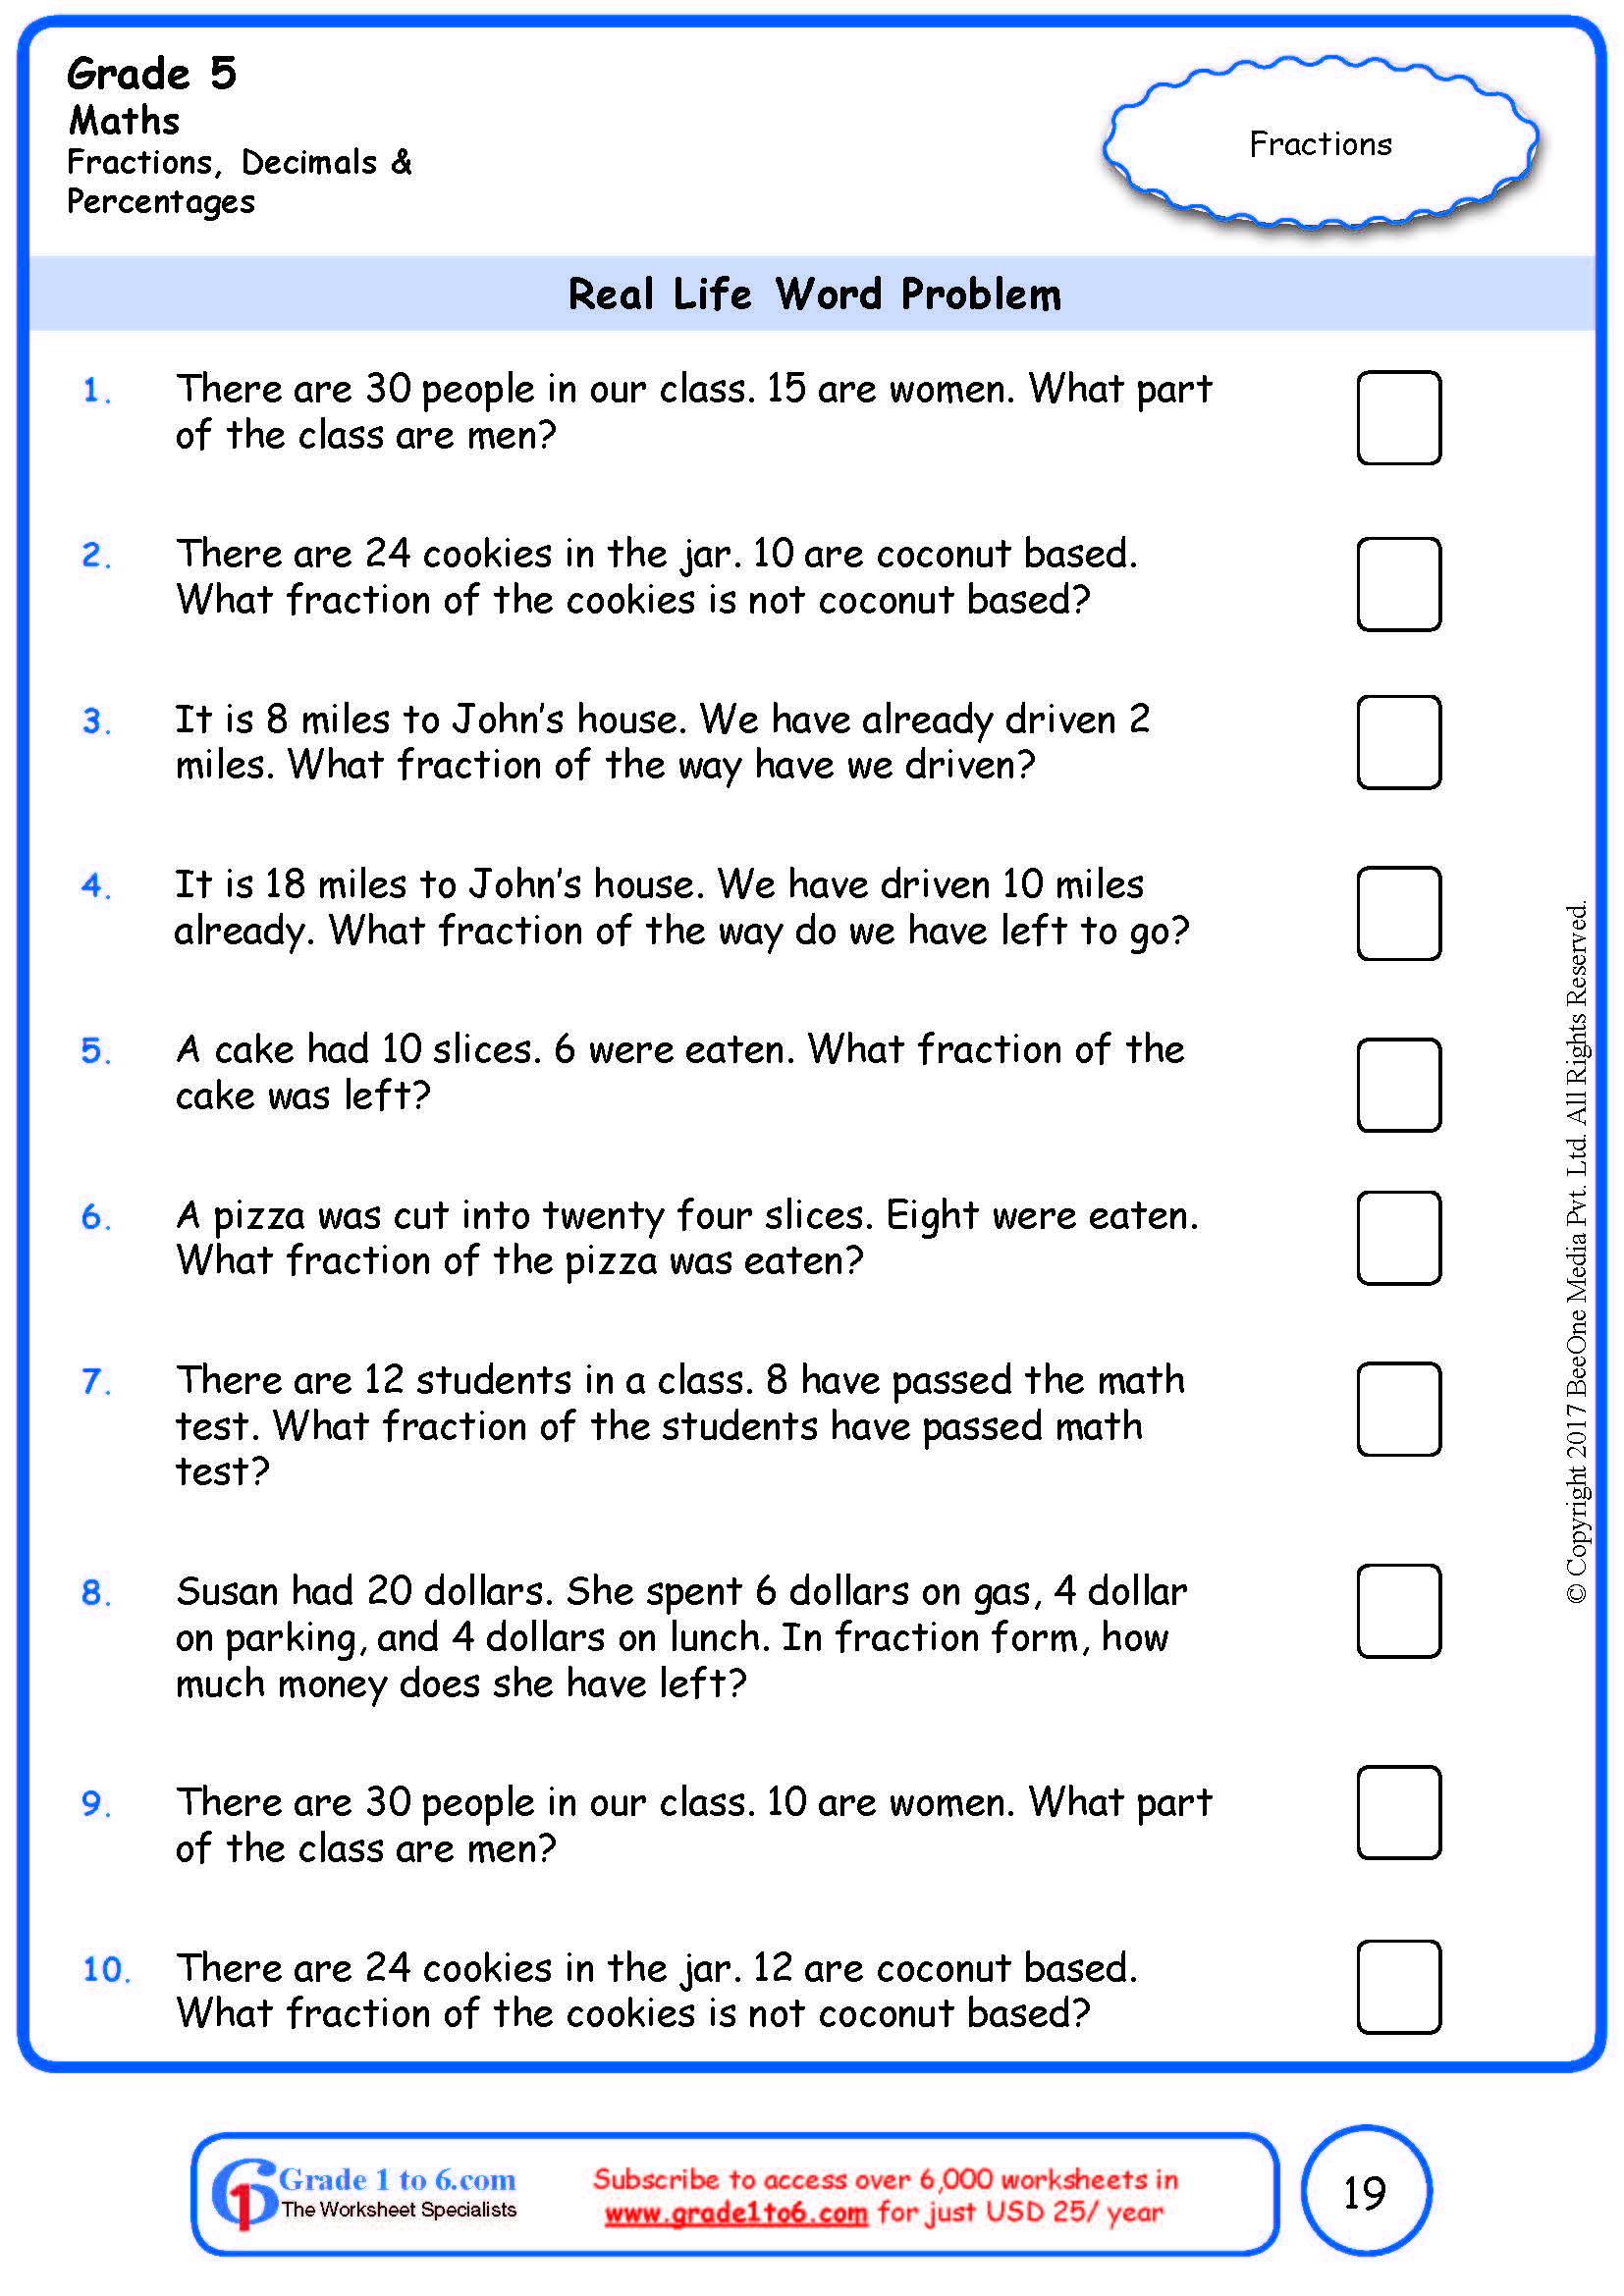 Grade 5 Word Problems in Fractions Worksheets|www.grade1to6.com